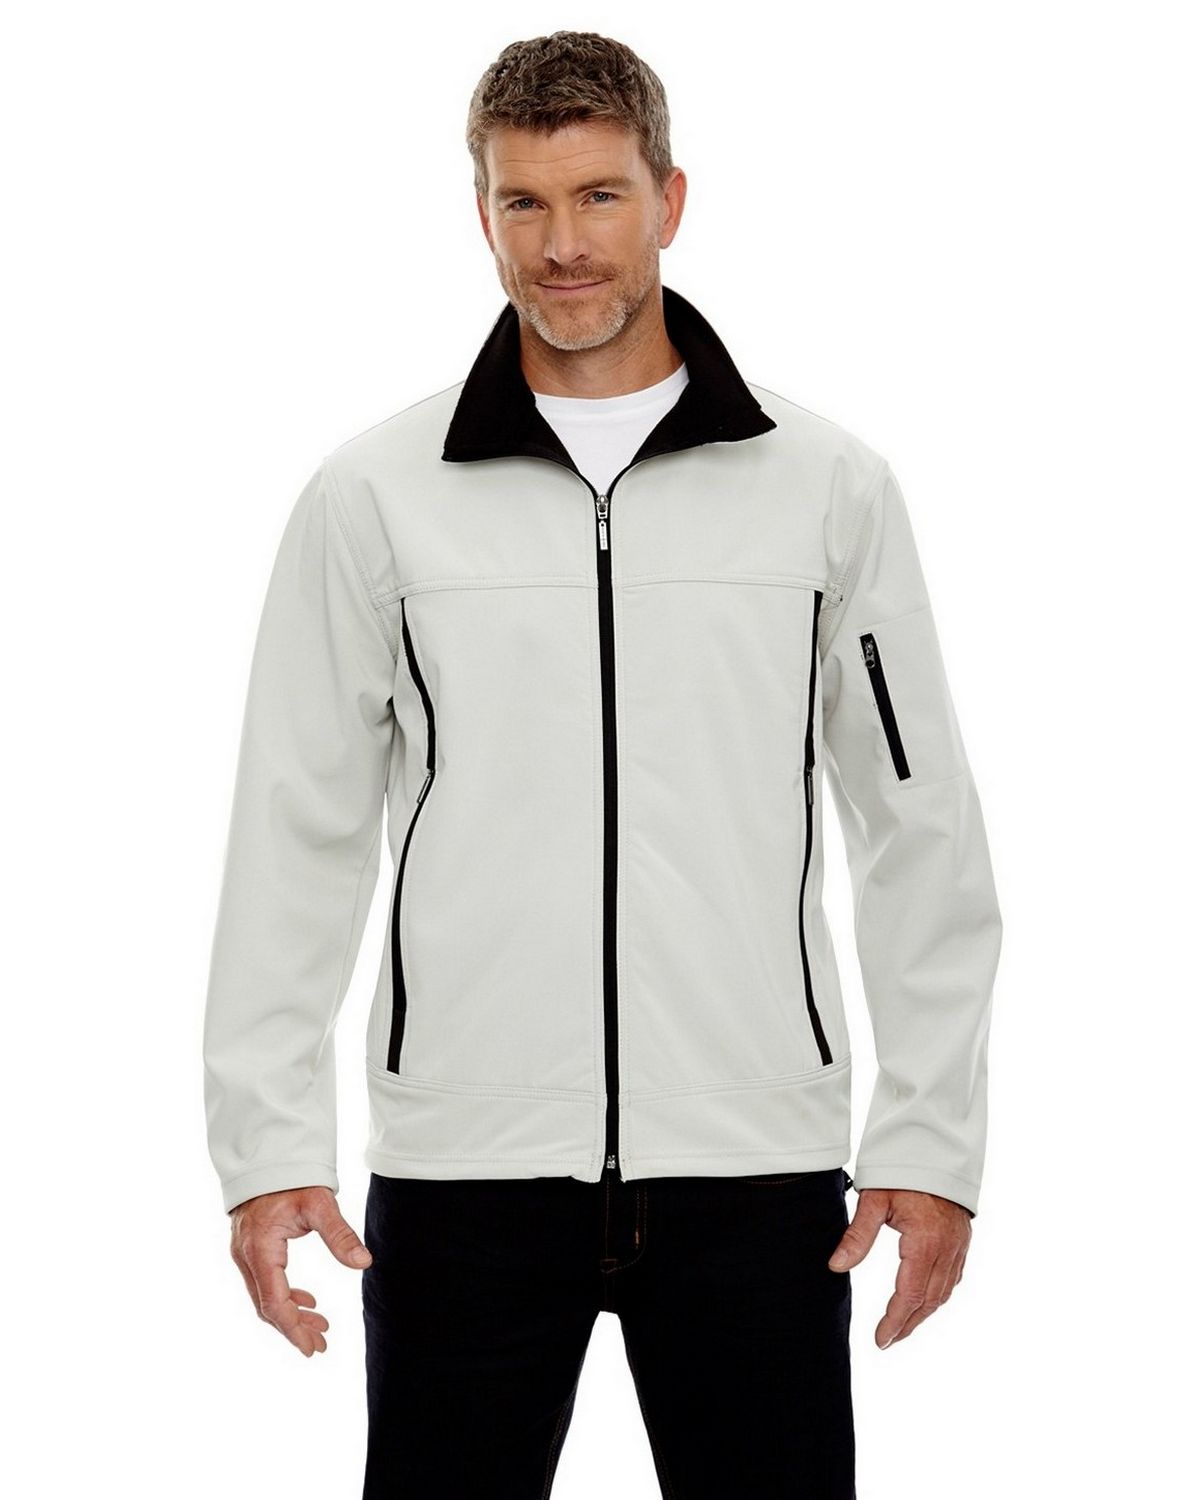 North End 88099 Mens Performance Soft Shell Jacket